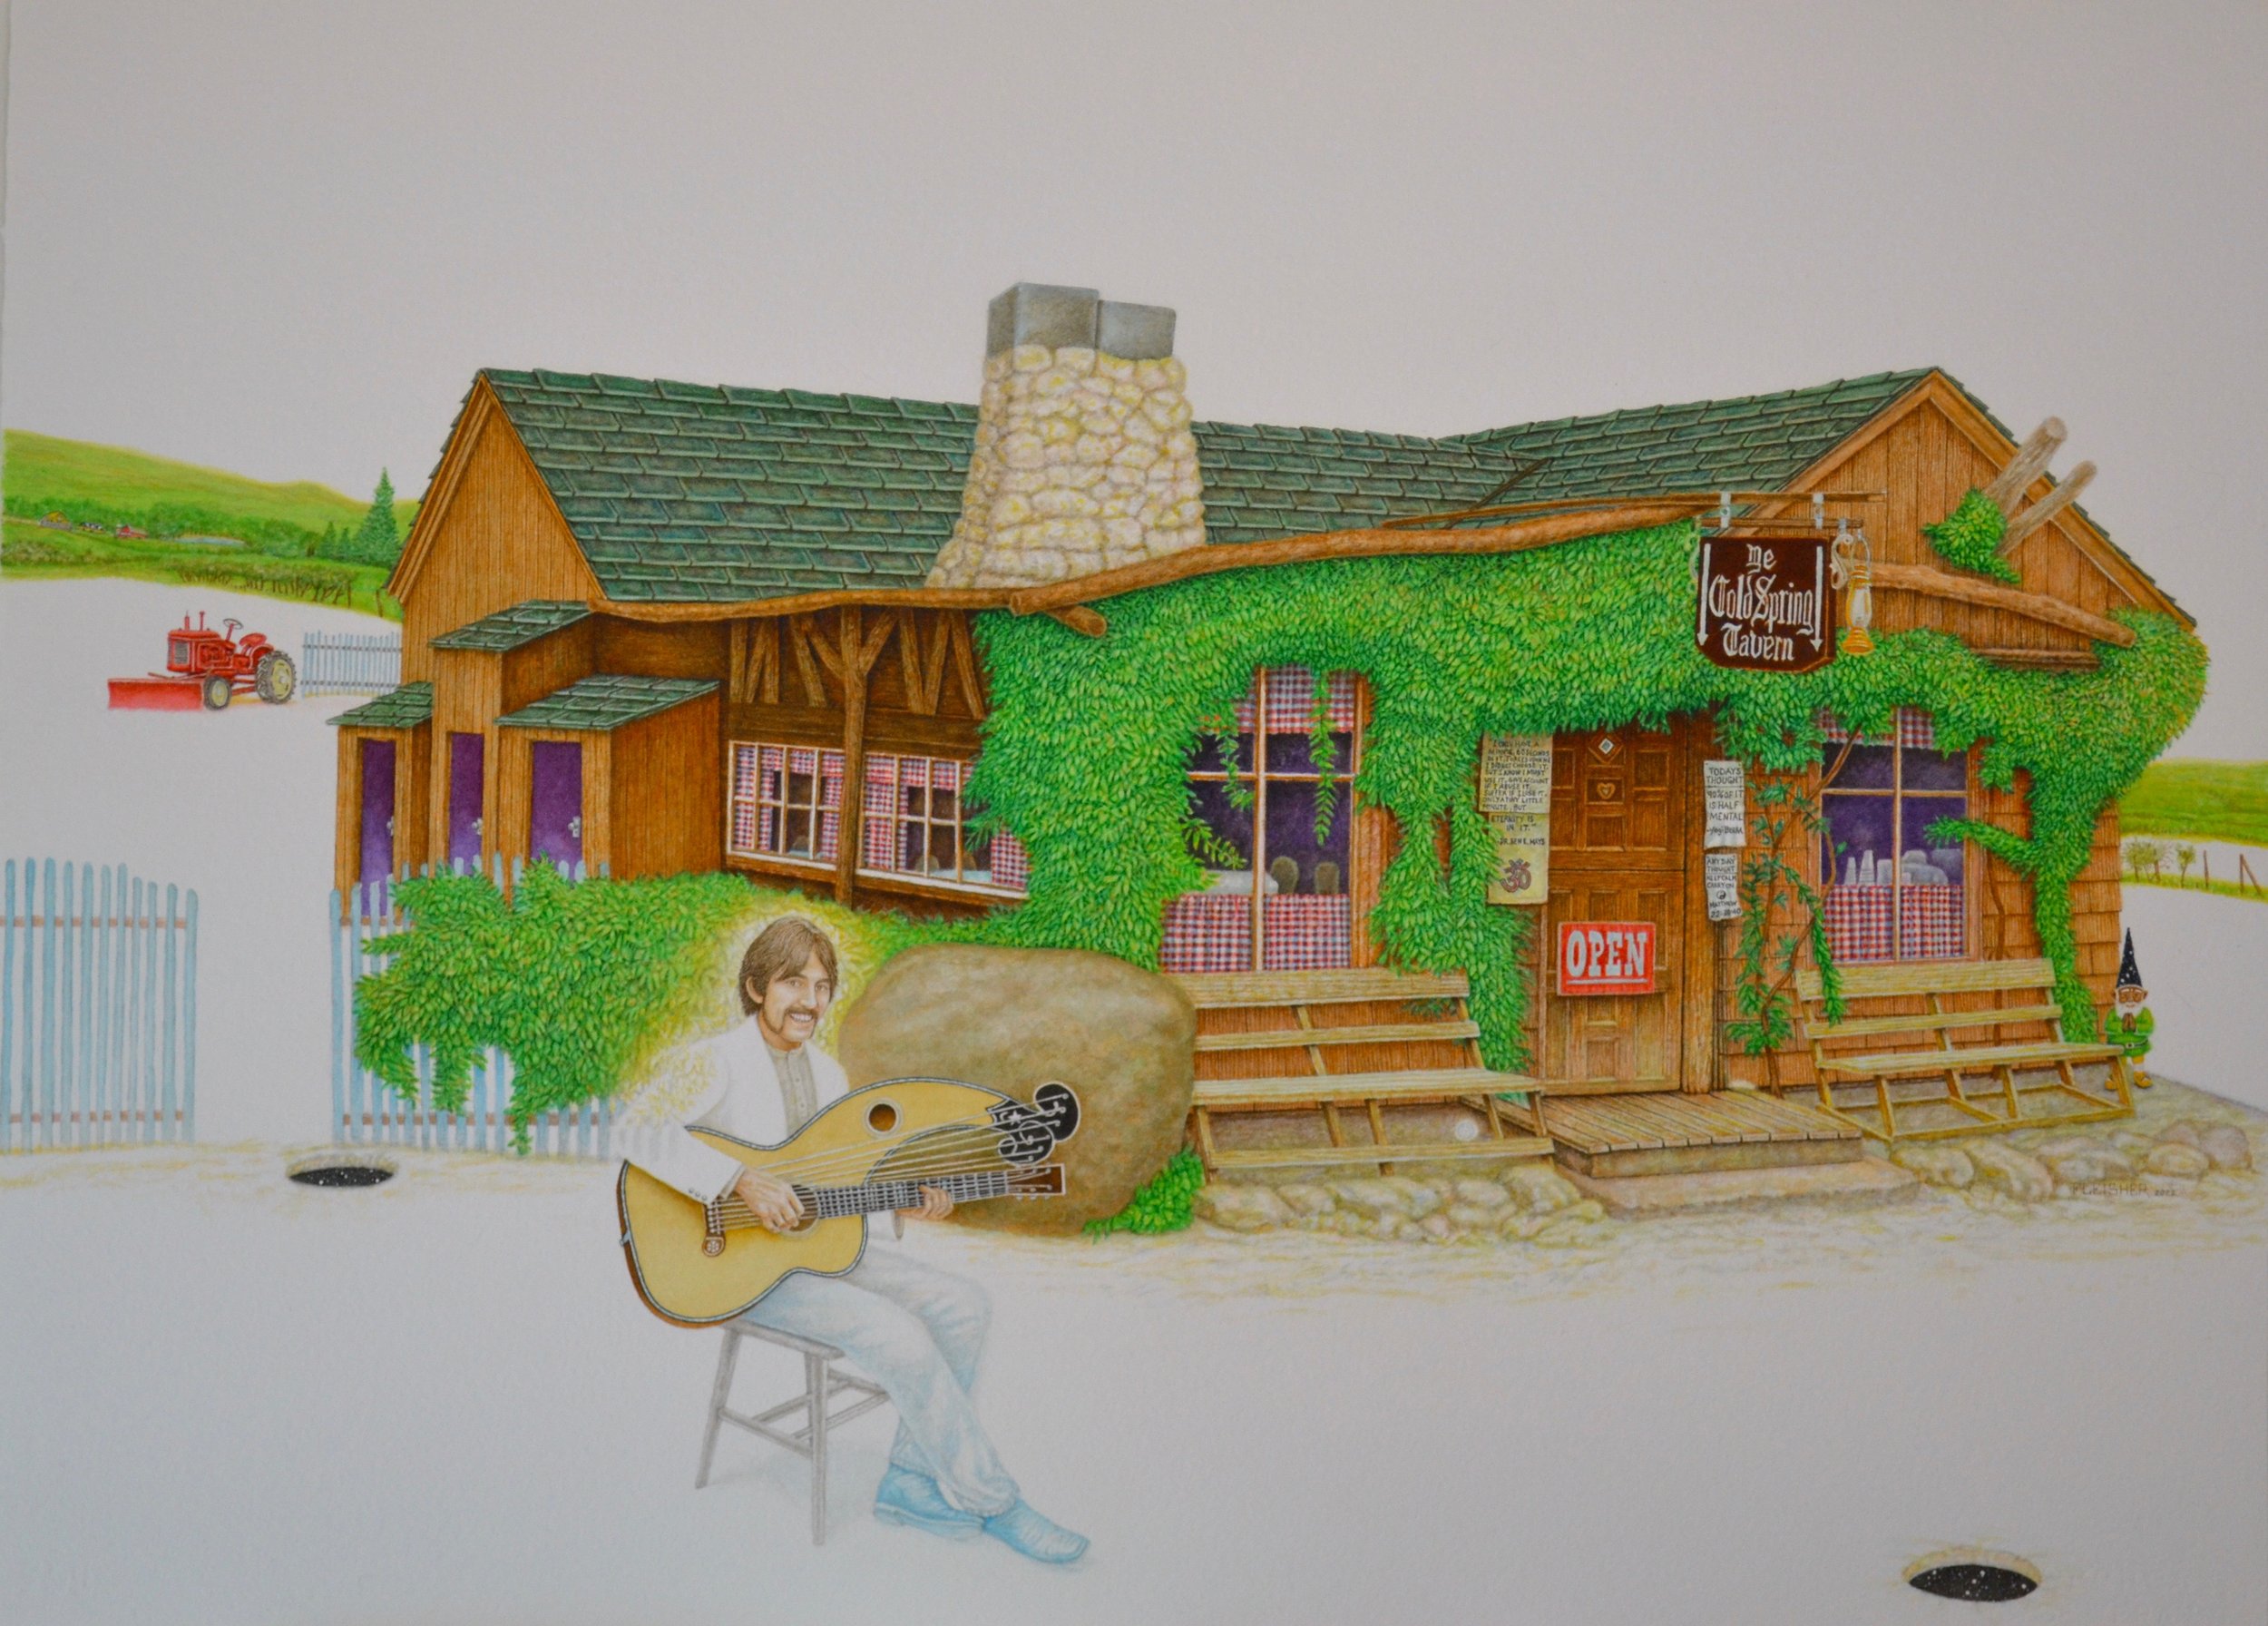 Ye Cold Spring Tavern with George Harrison  2022  30x22  watercolor